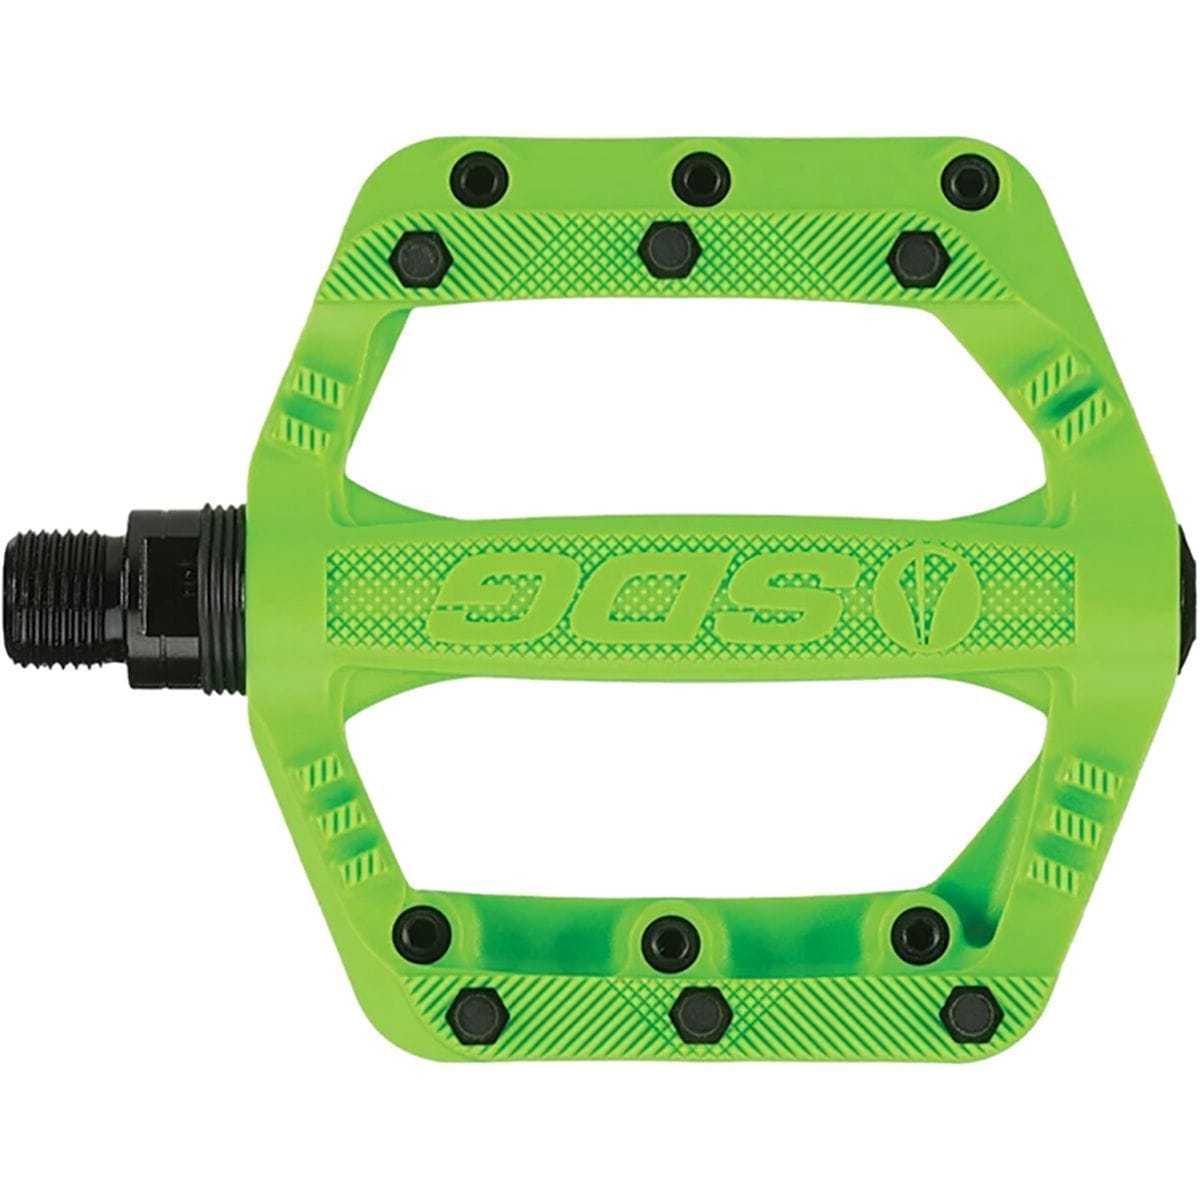 SDG Components Slater Pedals Neon Green, One Size